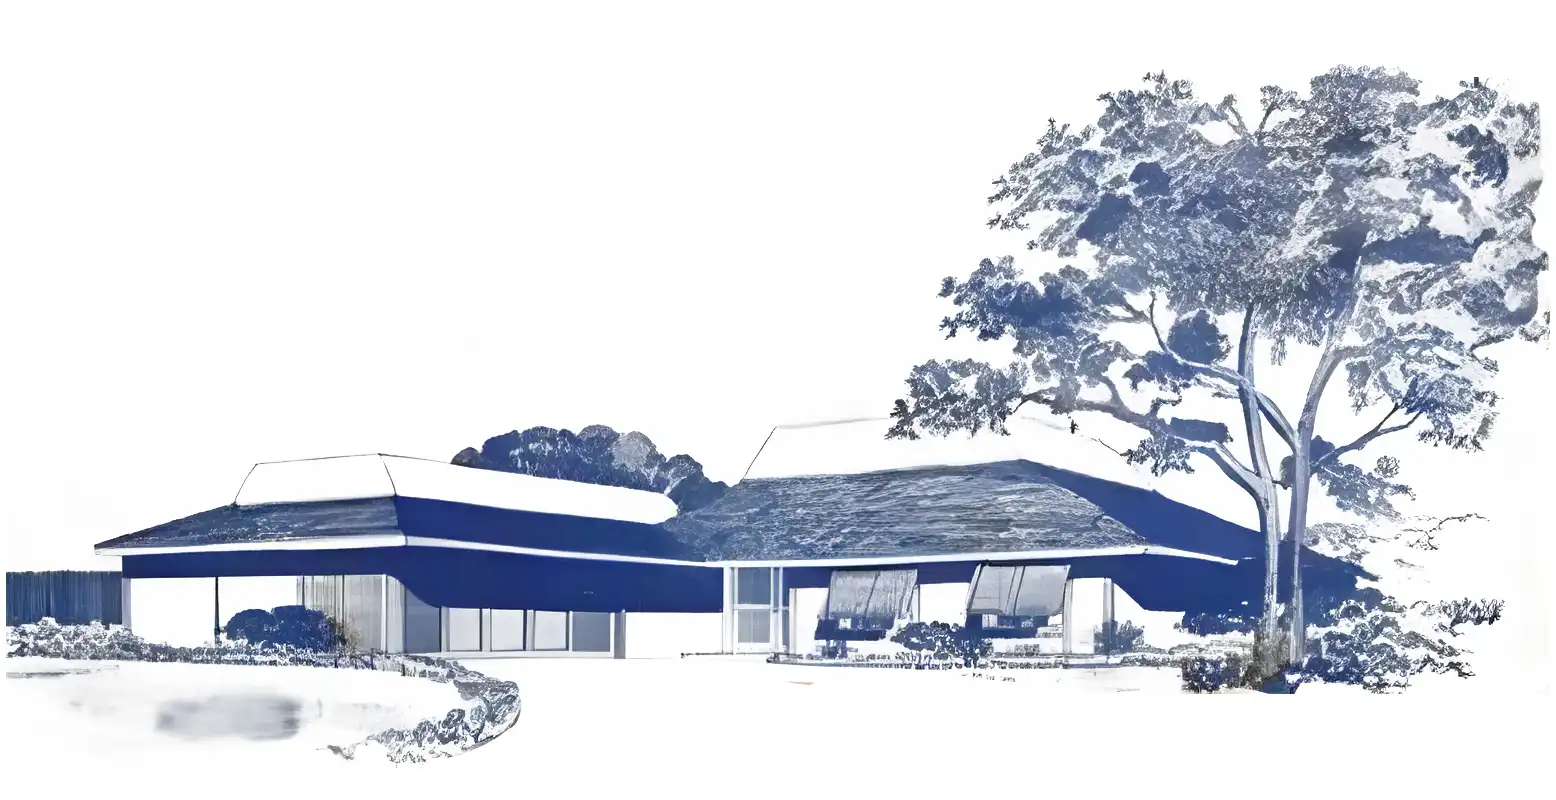 Monochrome rendering of 1960s ranch style house, variant with flat-topped dutch gable roof.